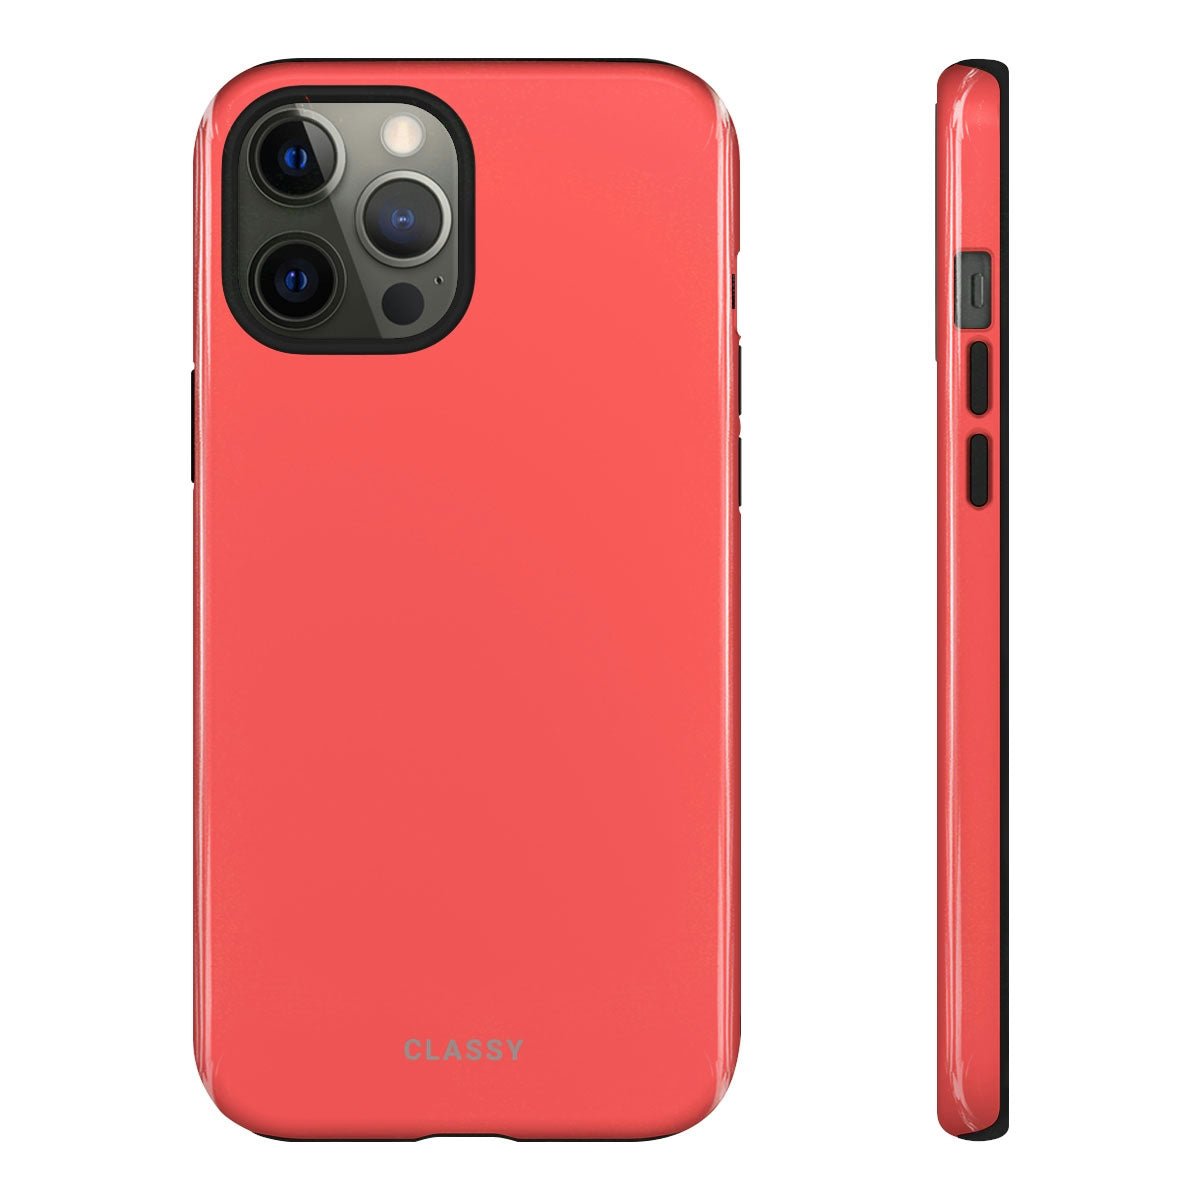 Coral Red Tough Case - Classy Cases - Phone Case - iPhone 12 Pro Max - Glossy -